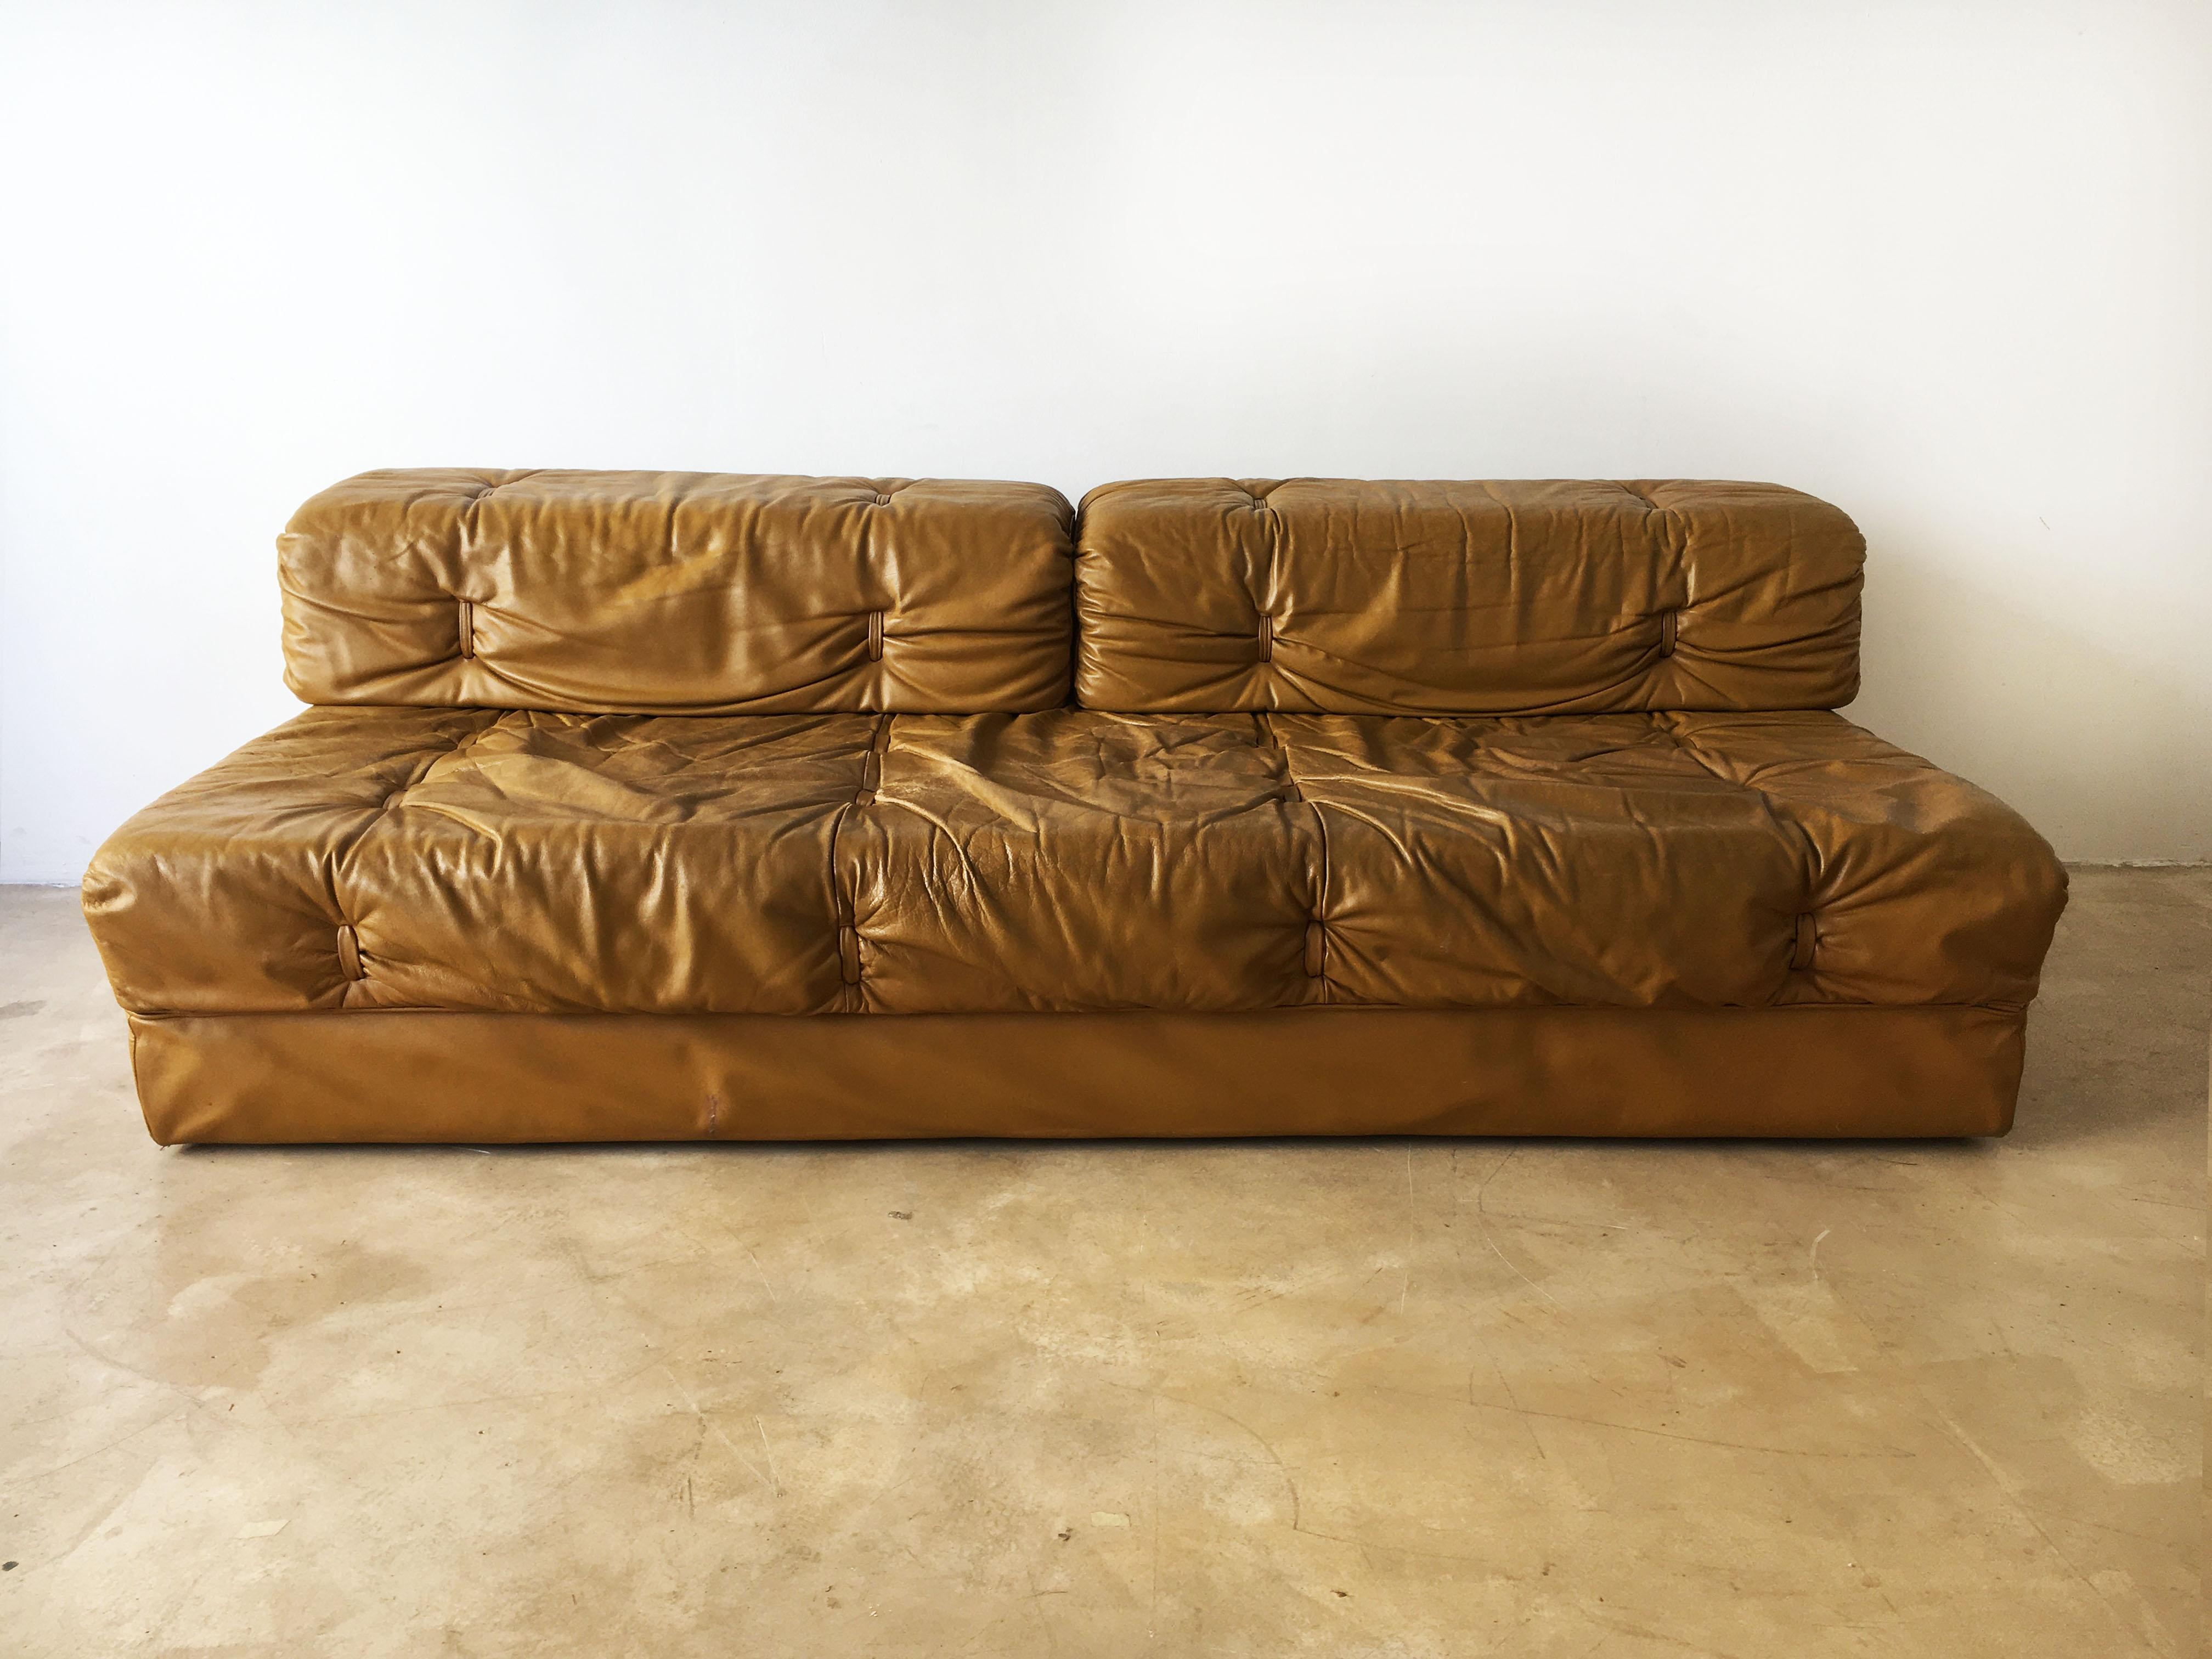 A fantastic modern modular living room suite in aged and patinated leather designed by Karl Wittmann and manufactured by Wittmann Möbelwerkstätten, Austria, 1970s. The set consists of three sectional elements which were designed to be arranged as a